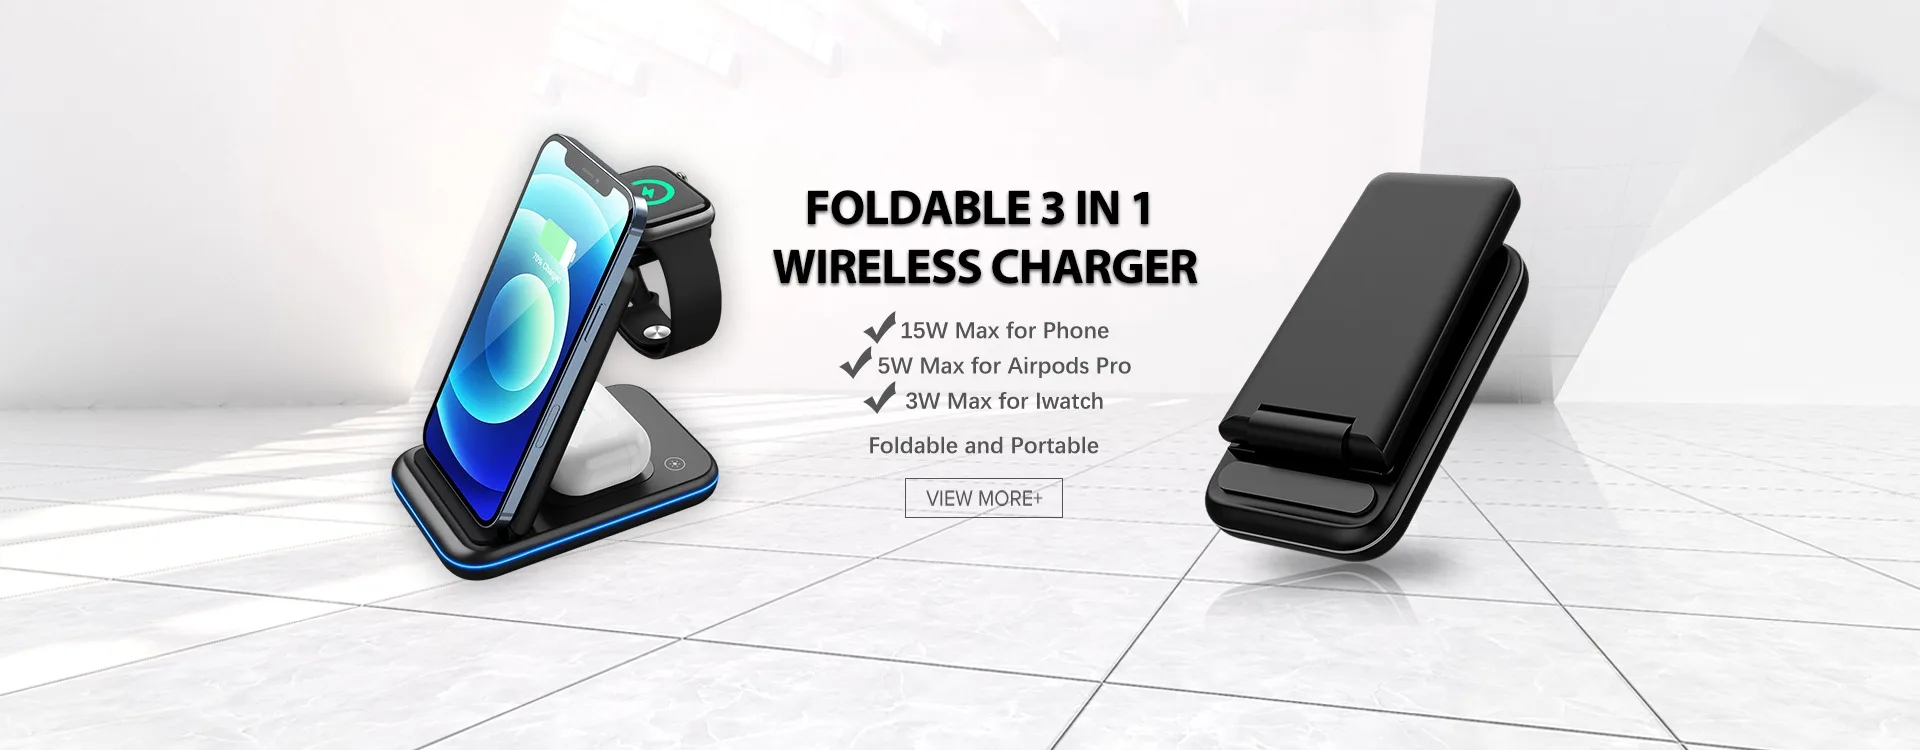 Foldable 3 in 1 wireless charger